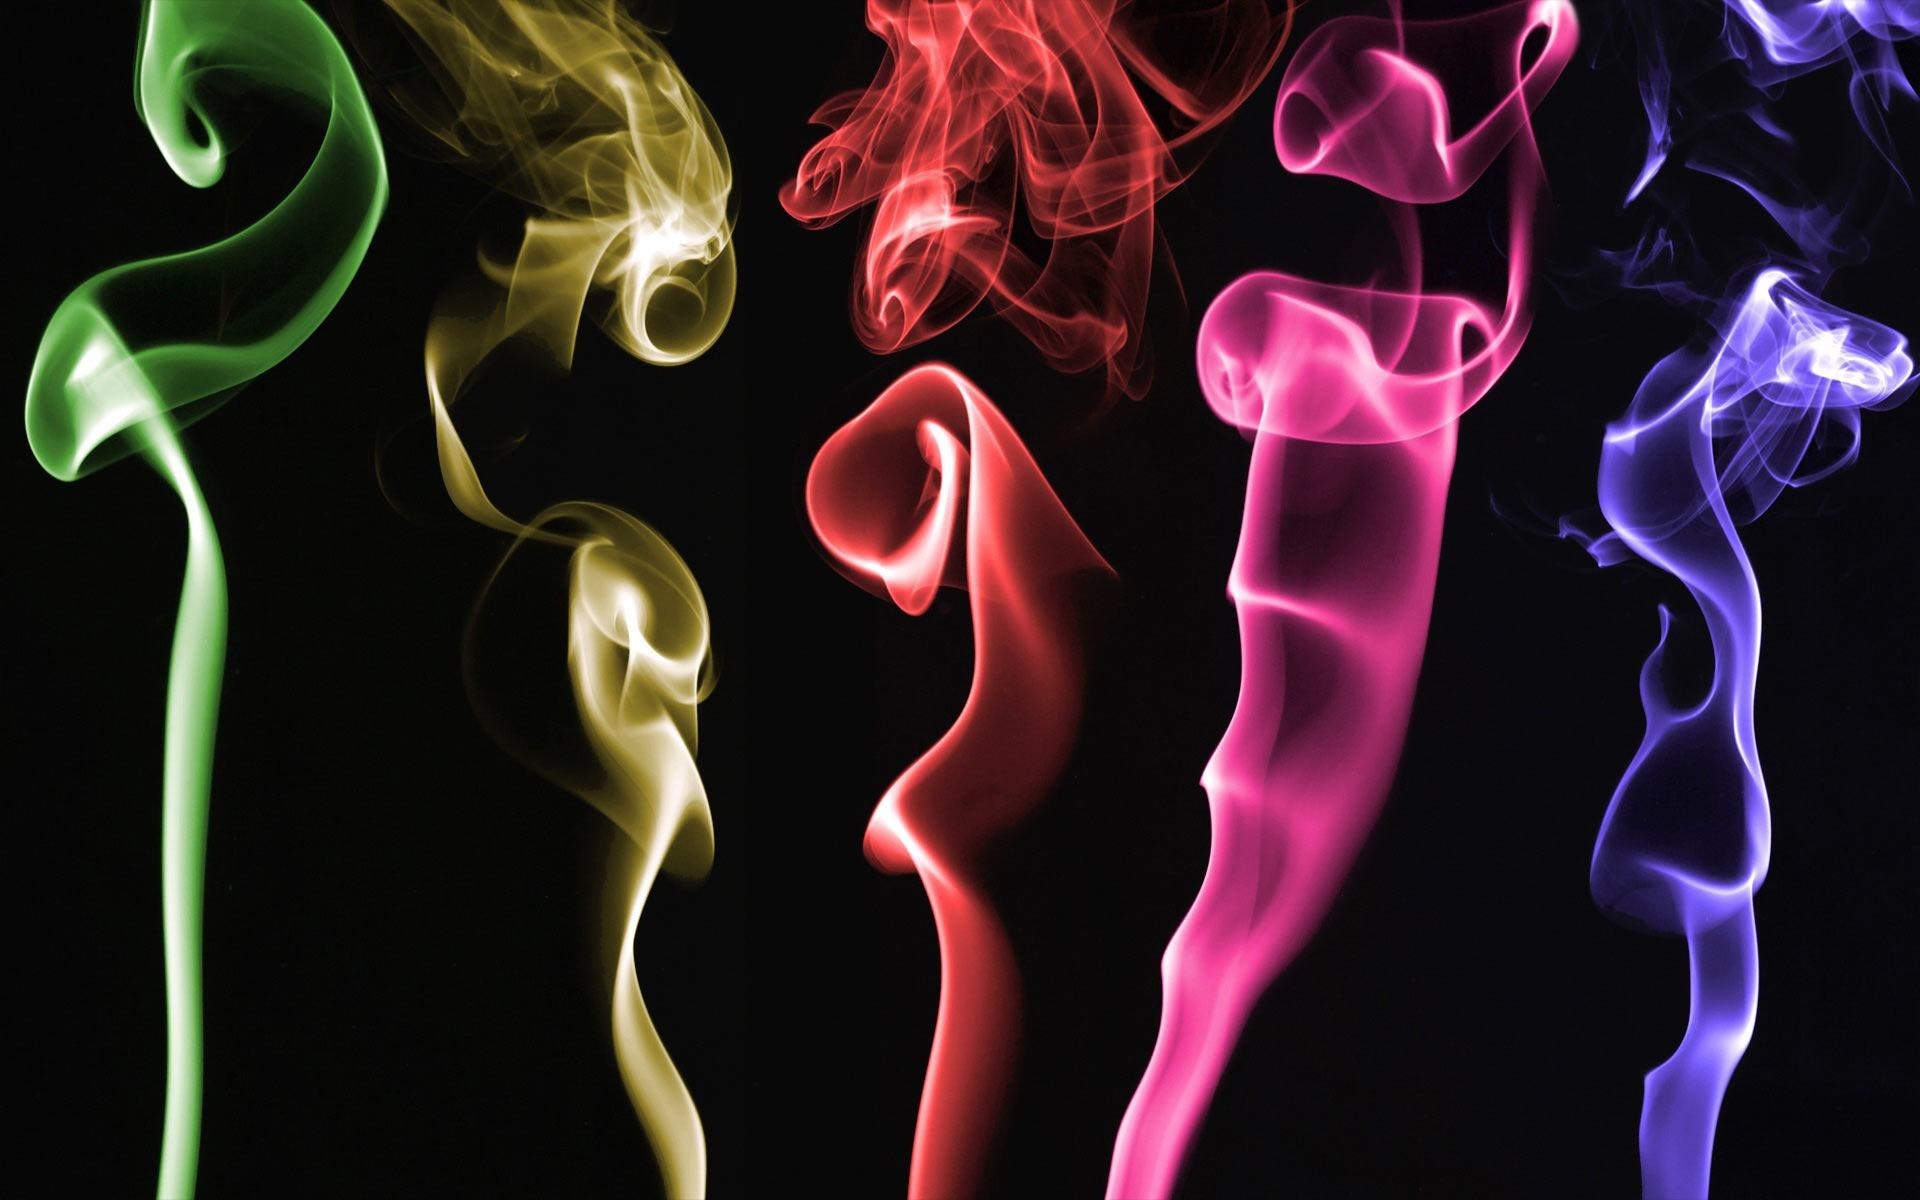 1920x1200 Wallpapers Backgrounds - Backgrounds Computers Windows Colored smoke  Wallpaper